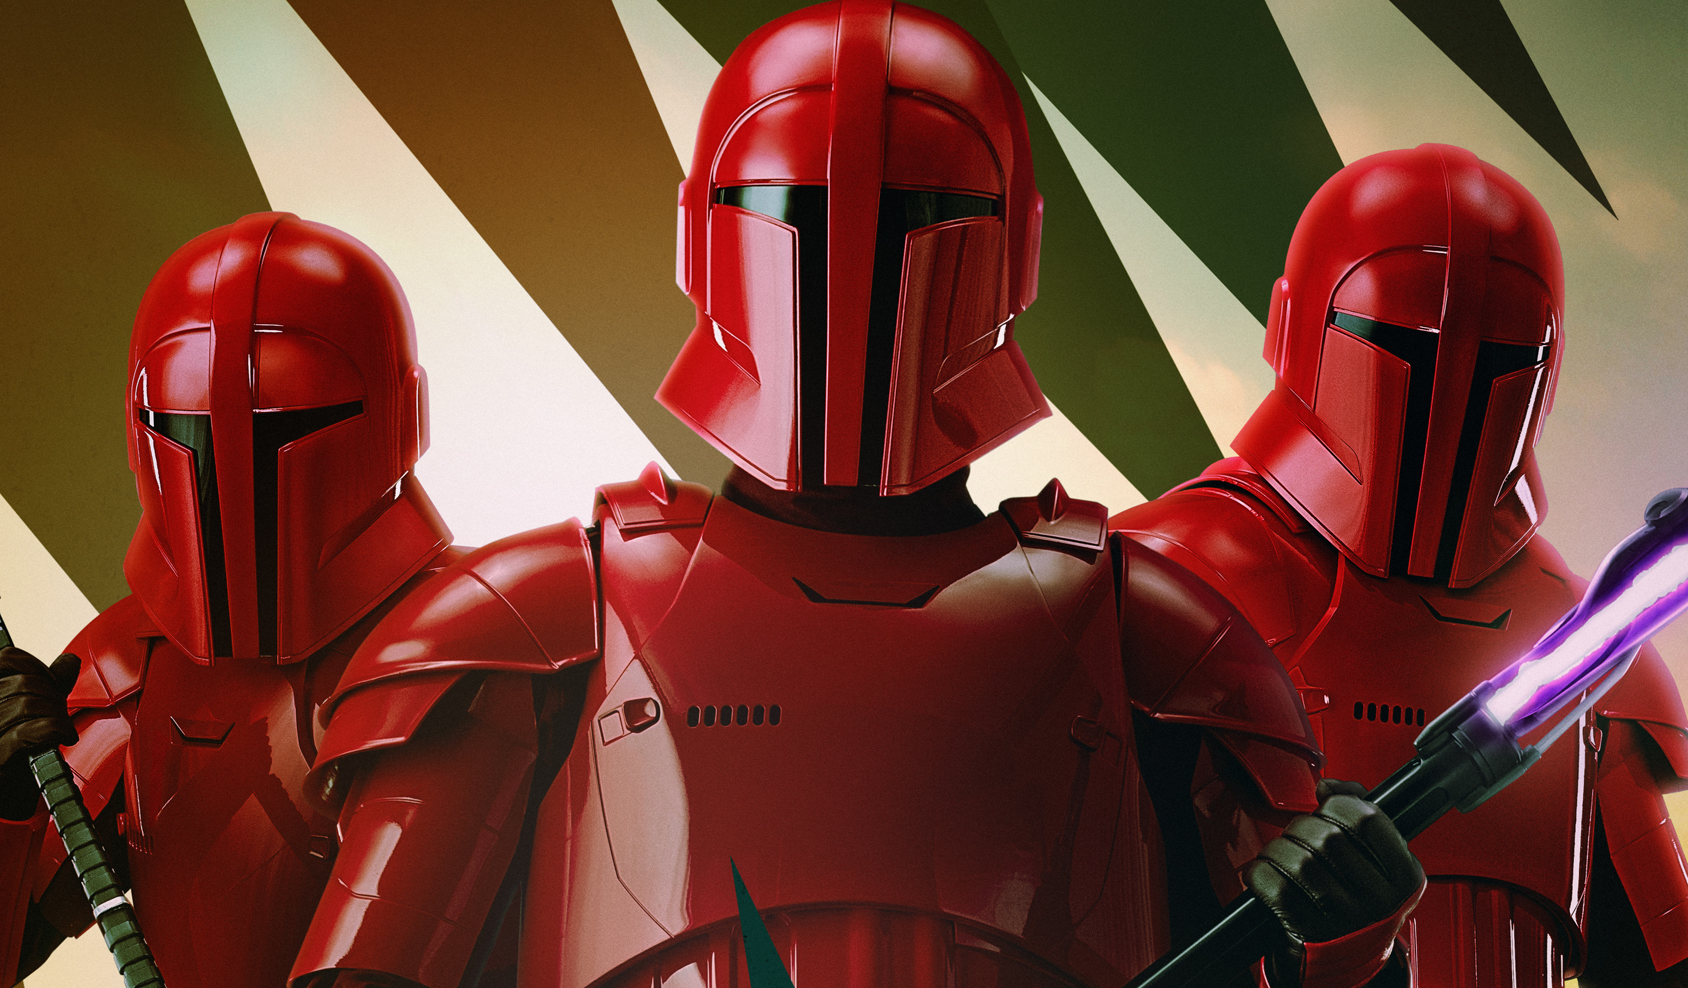 What to expect from the Mandalorian Season 3: New chapter in the